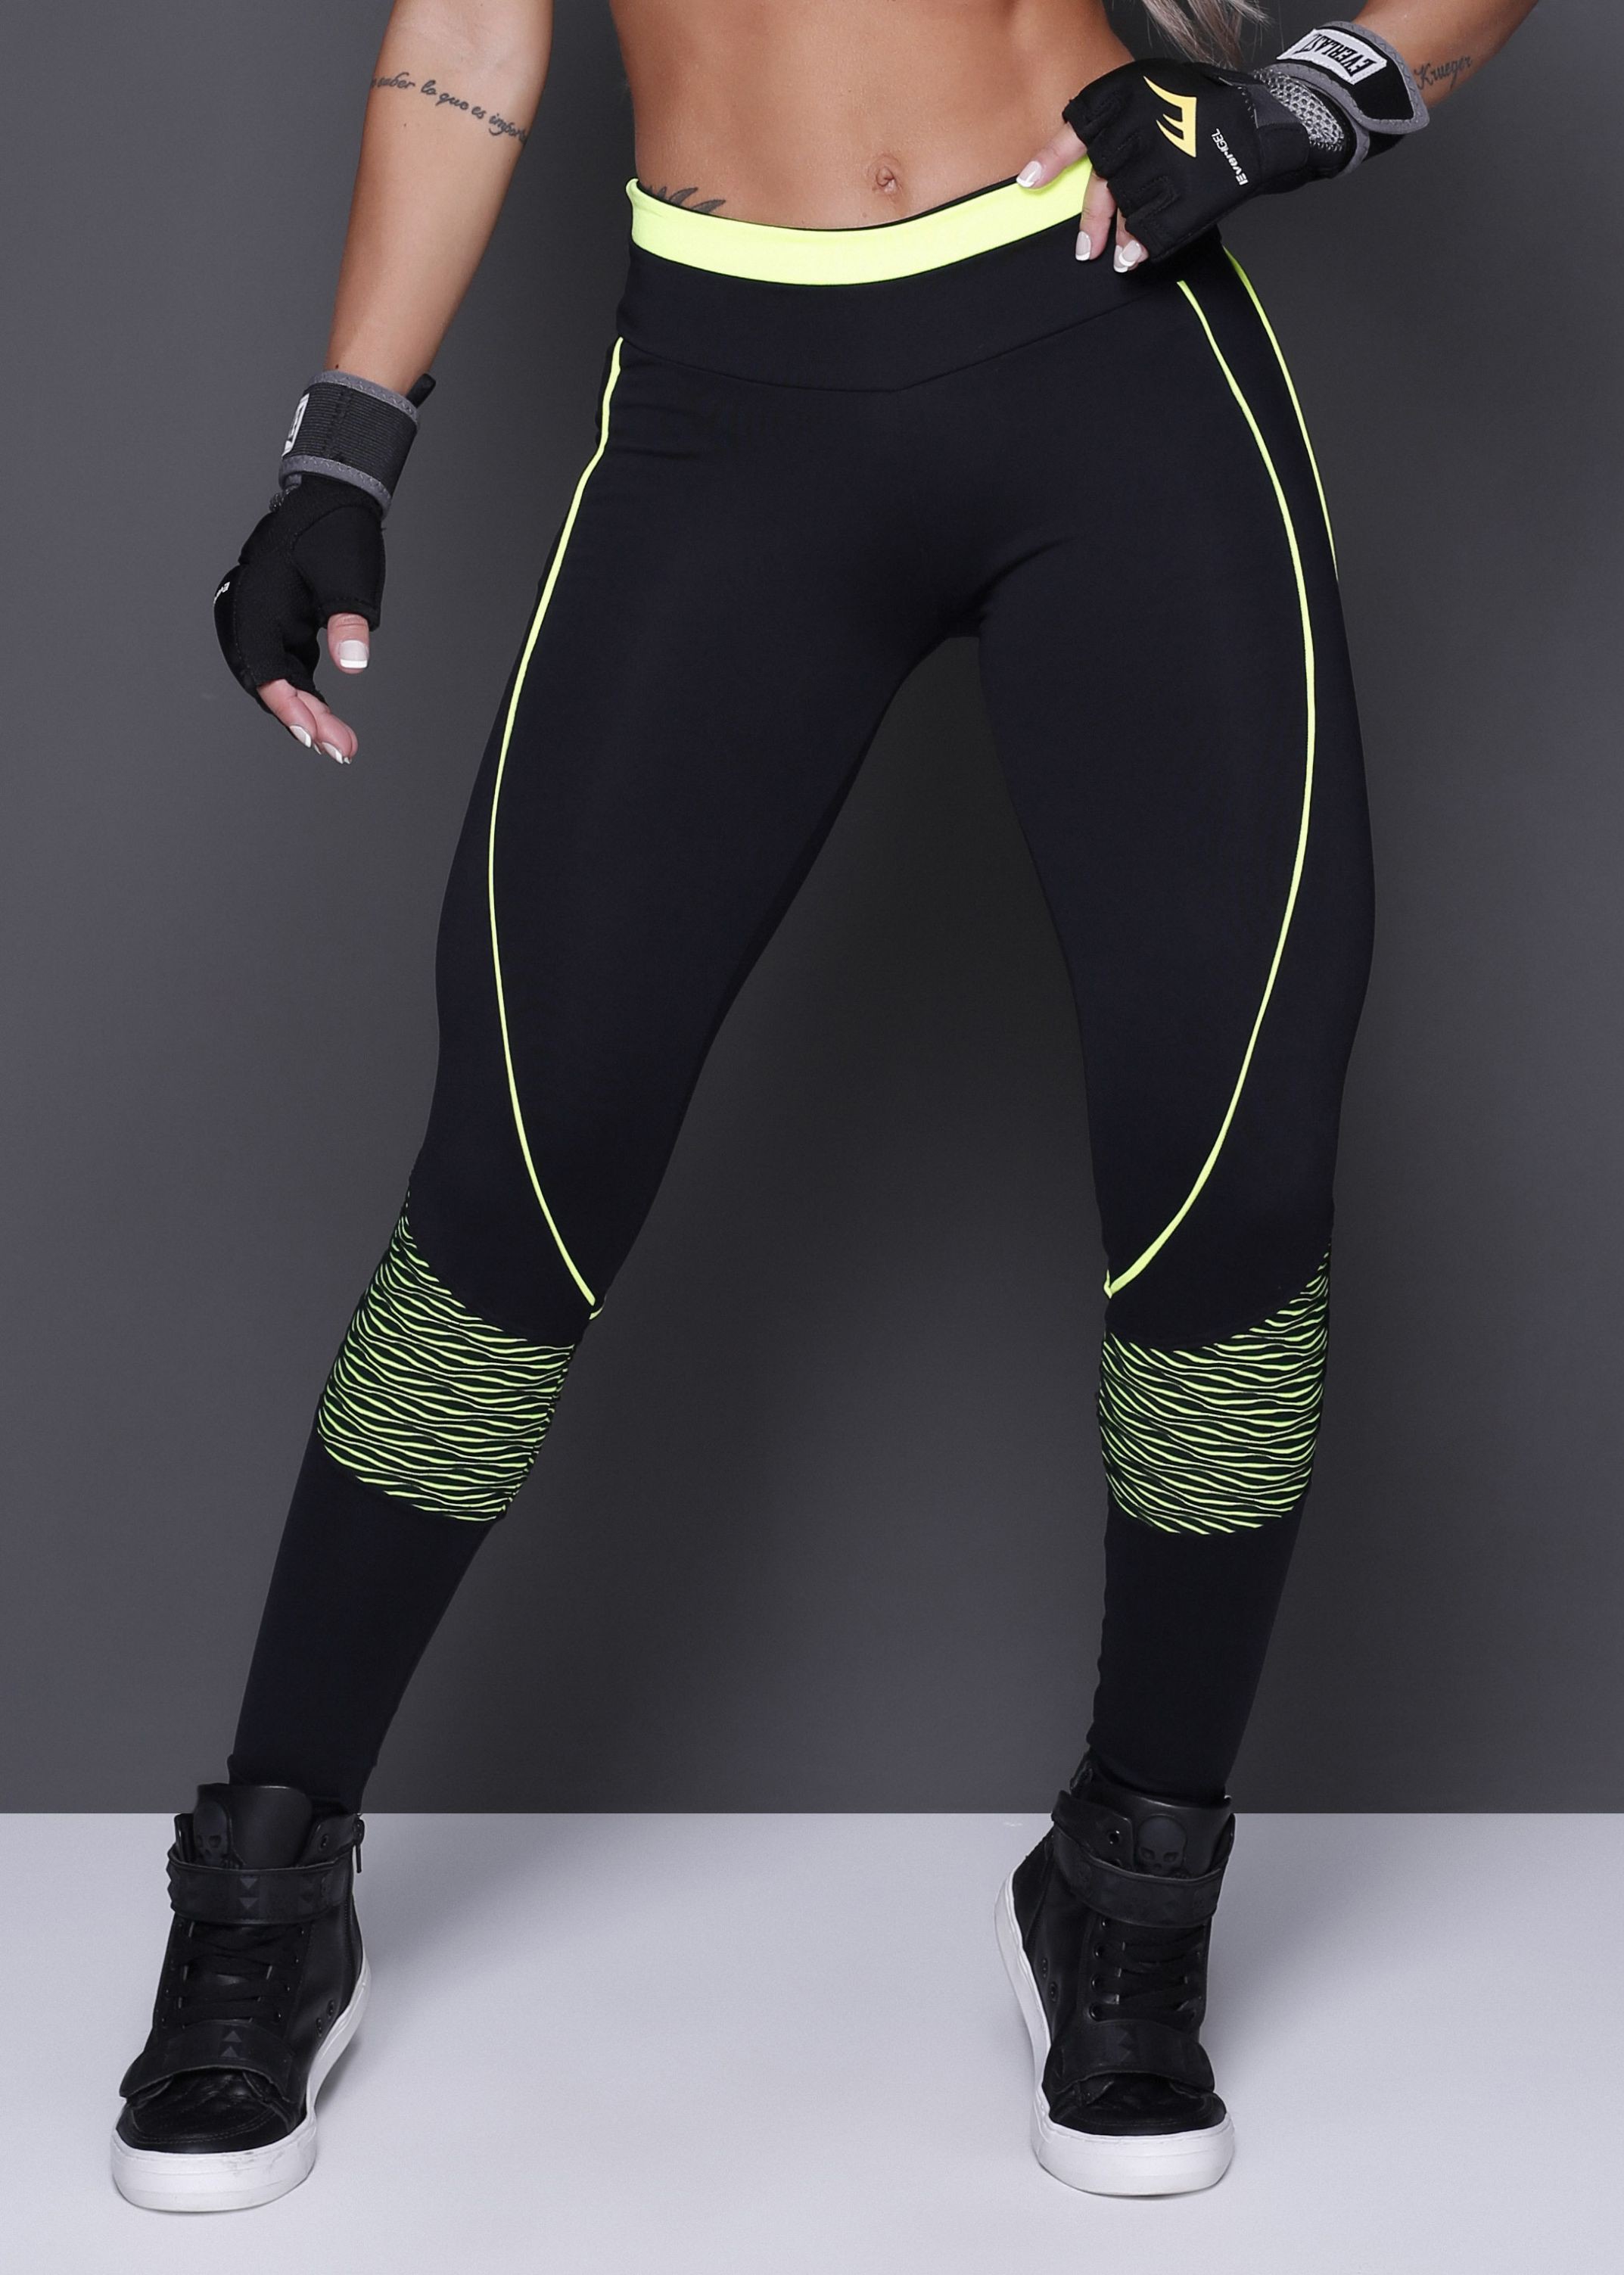 Leggings Lycra Calzedonia Tights  International Society of Precision  Agriculture